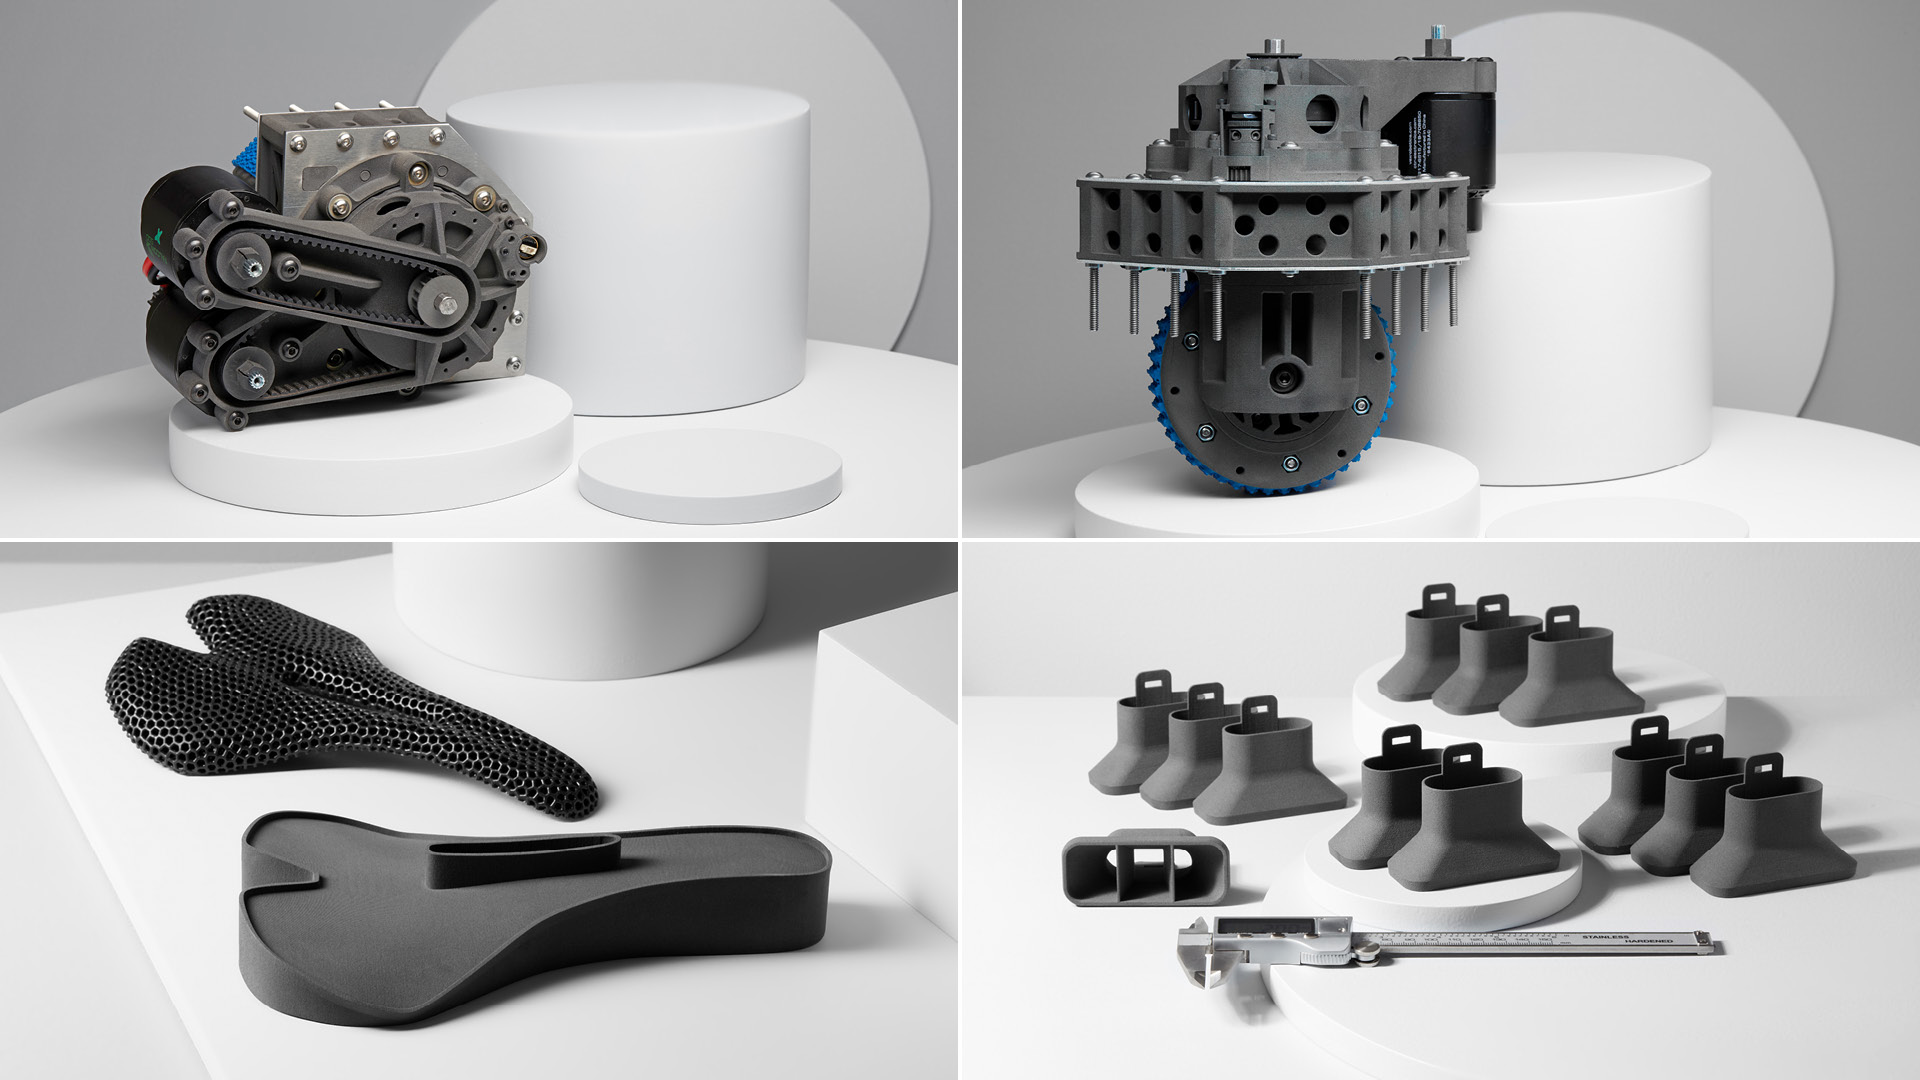 Formlabs Expands Additive Manufacturing Reach with Fuse 1 SLS Printer